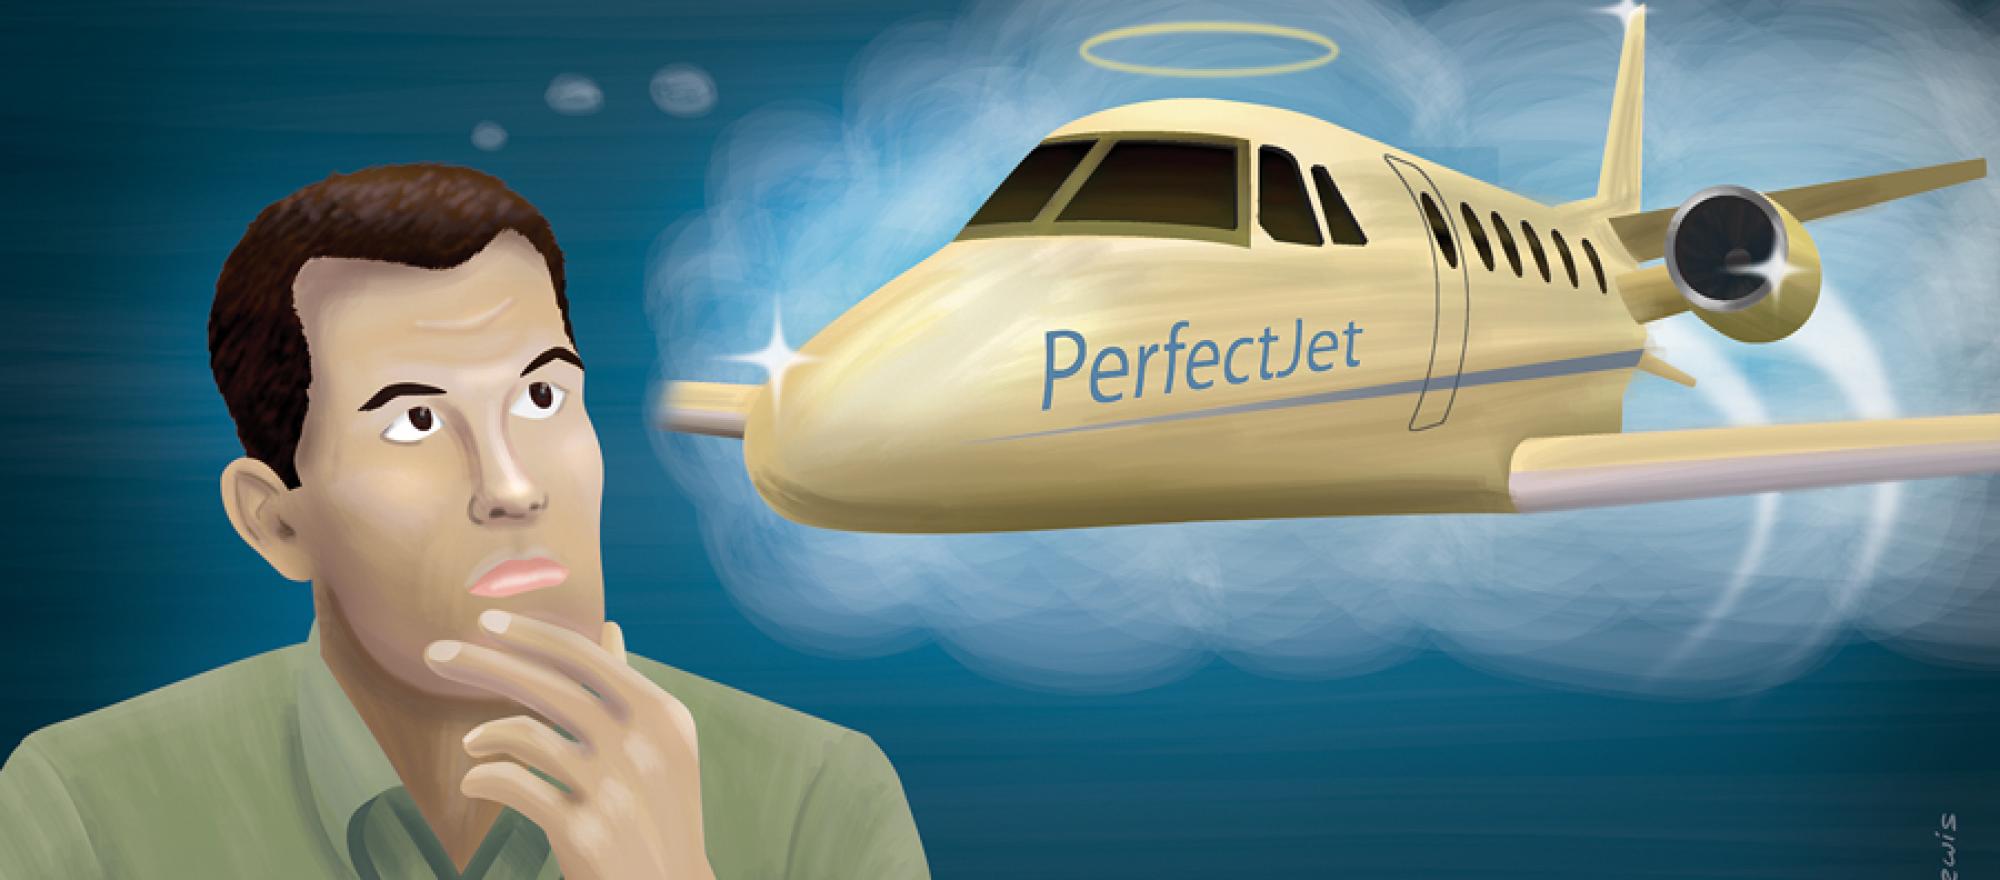 The perfect airplane